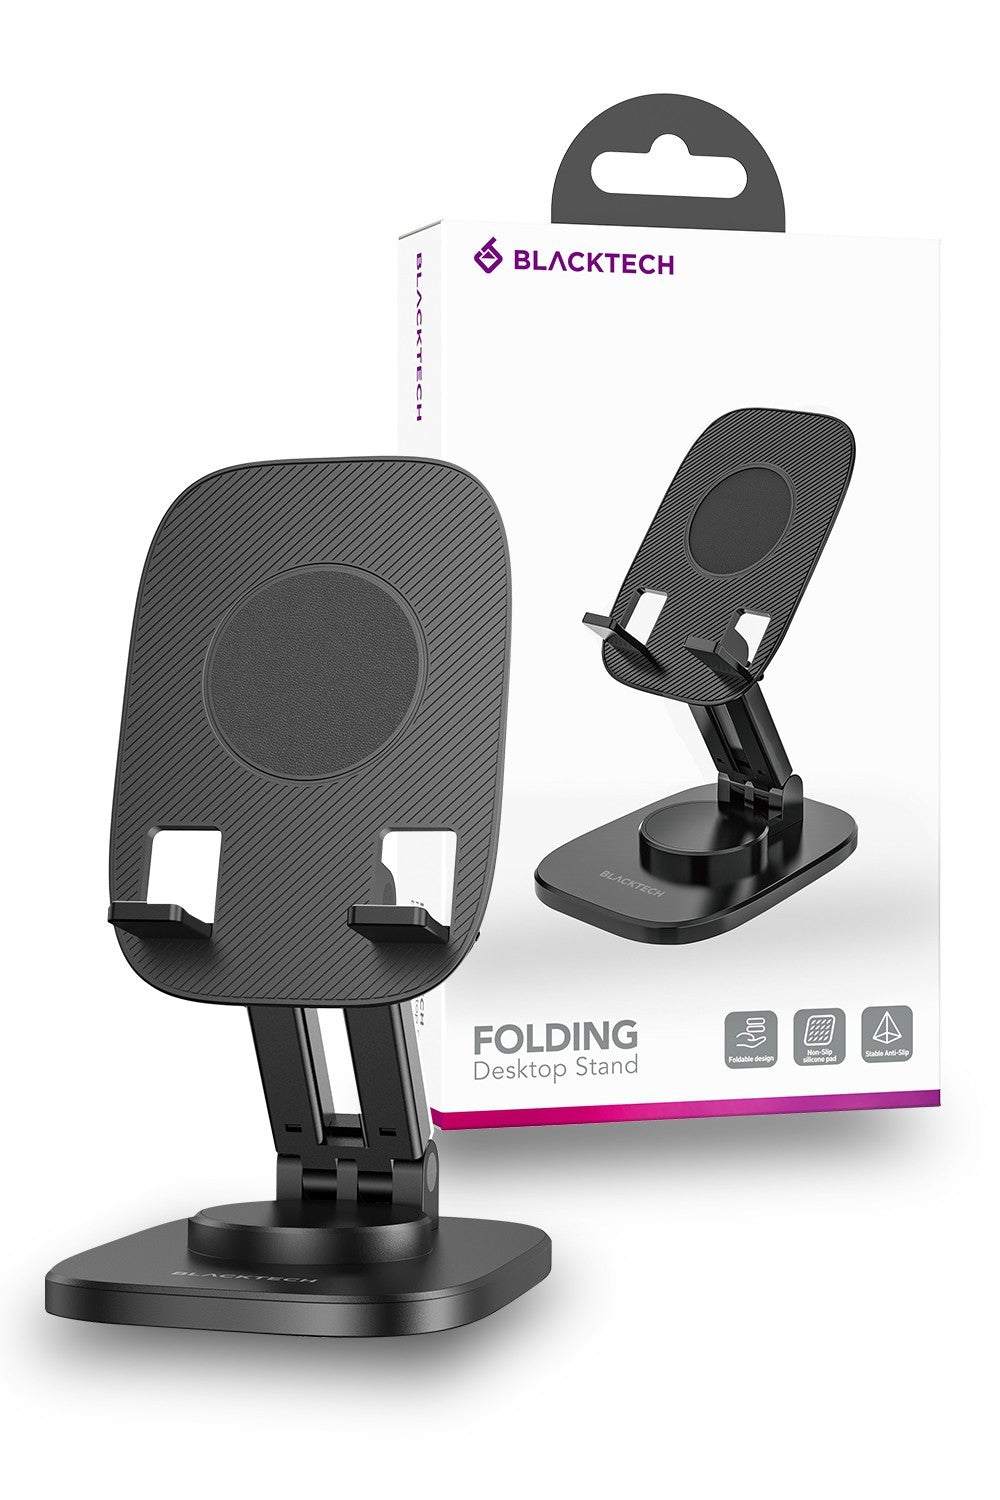 Blacktech Phone Tablet Holder Folding Rotating Stand for Desk Table